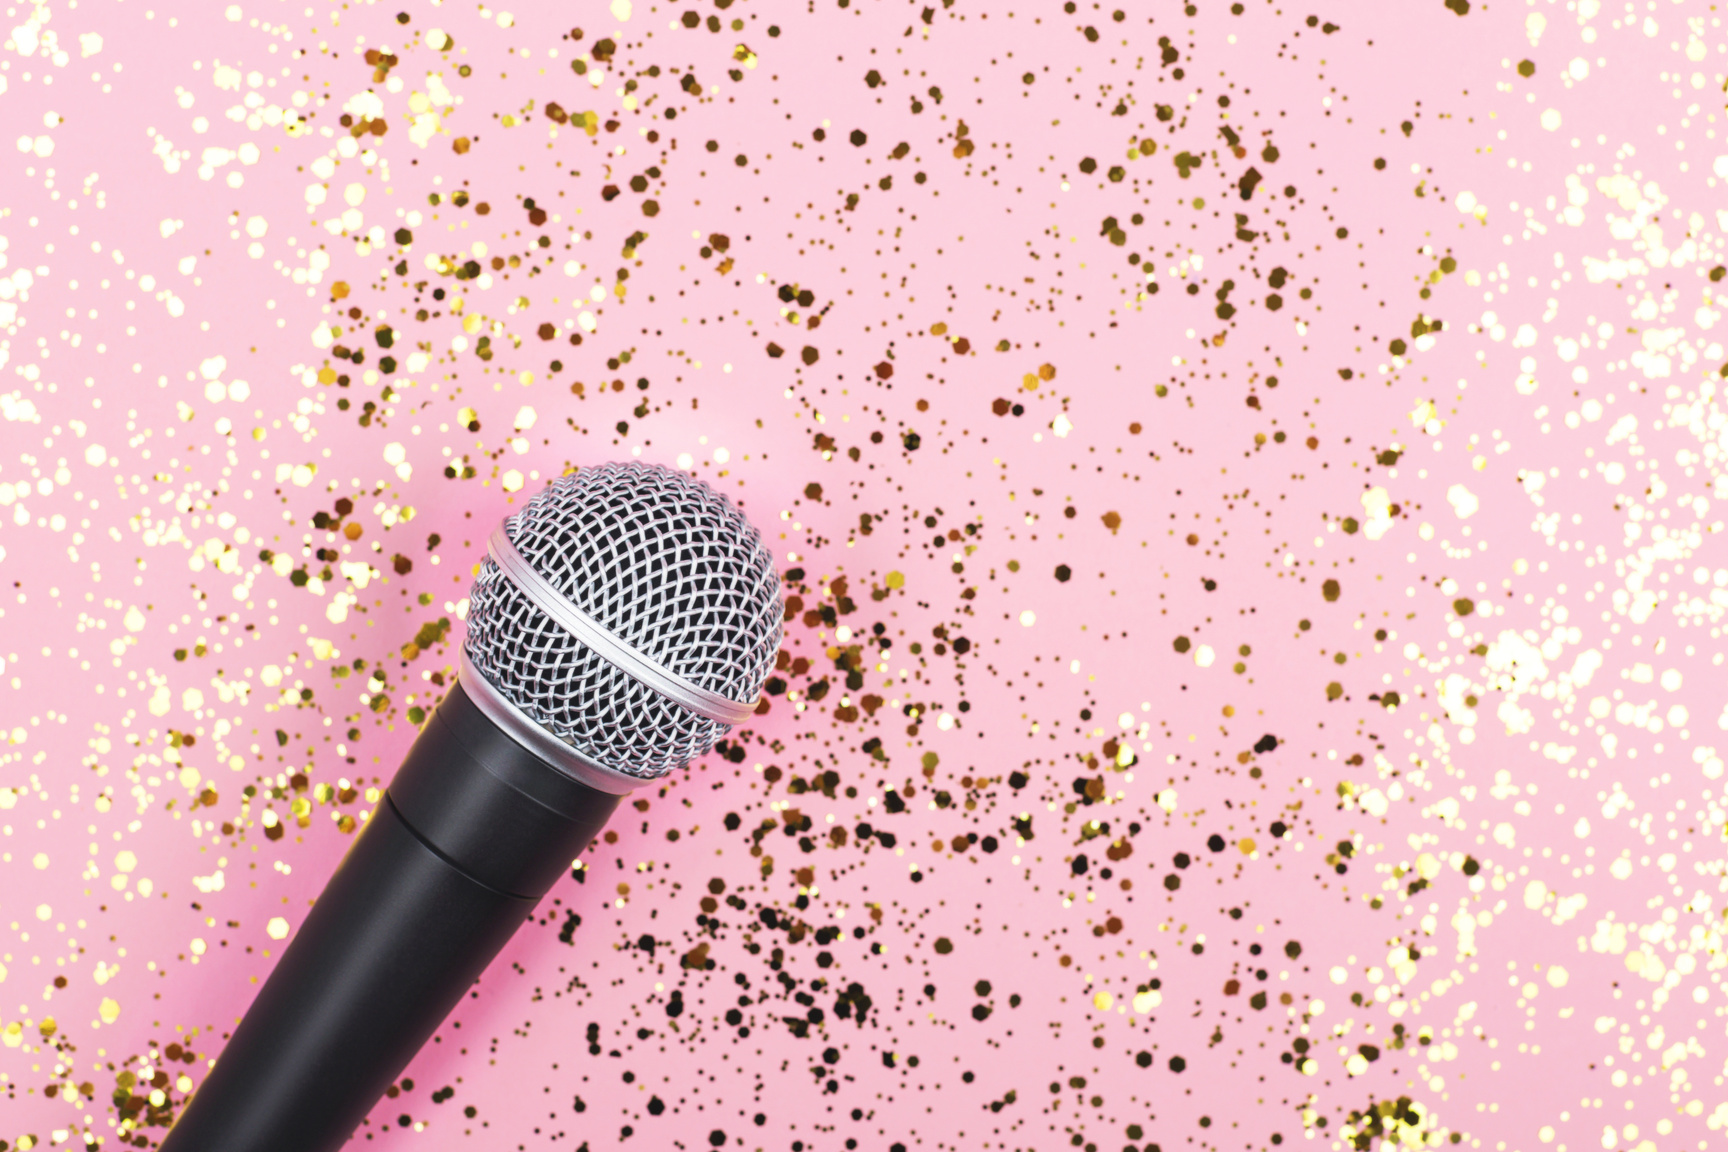 Microphone on Pink Background Decorated with Confetti